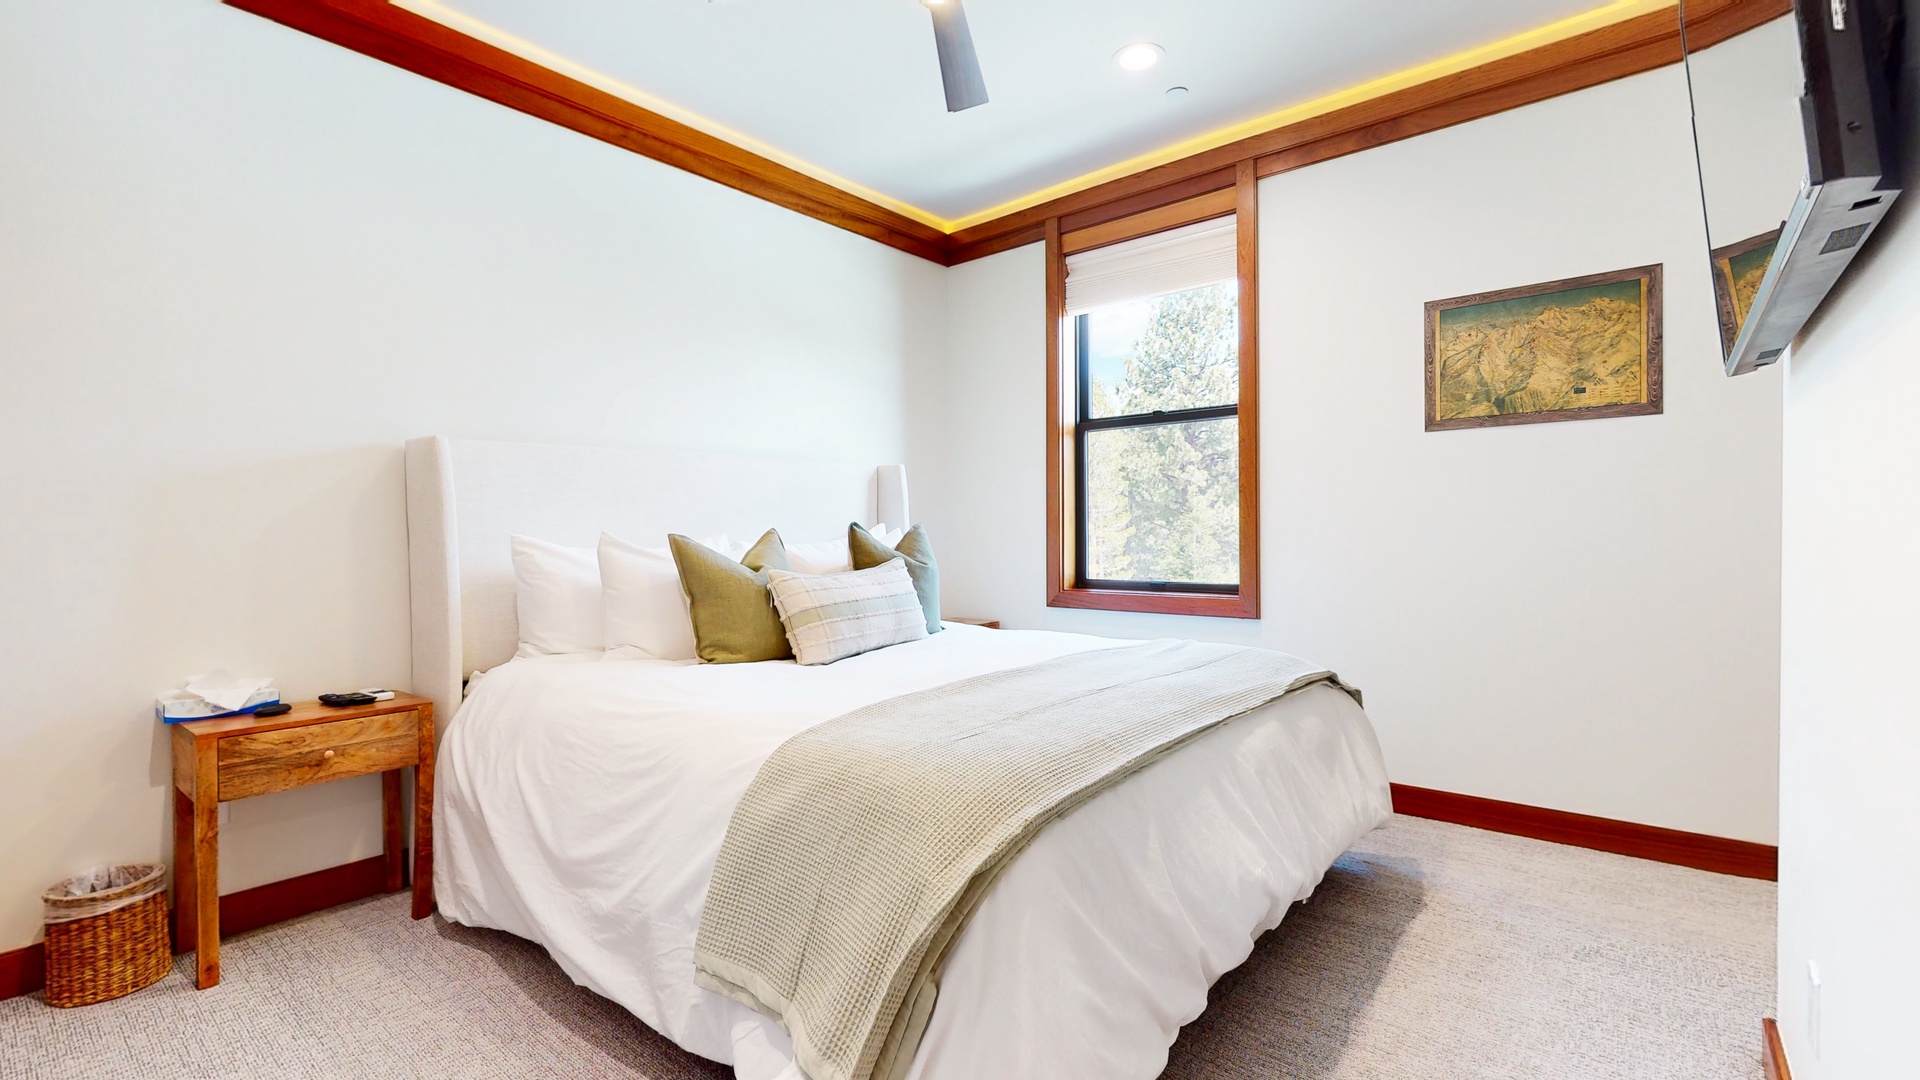 The tranquil 3rd floor king bedroom offers ample space and a Smart TV